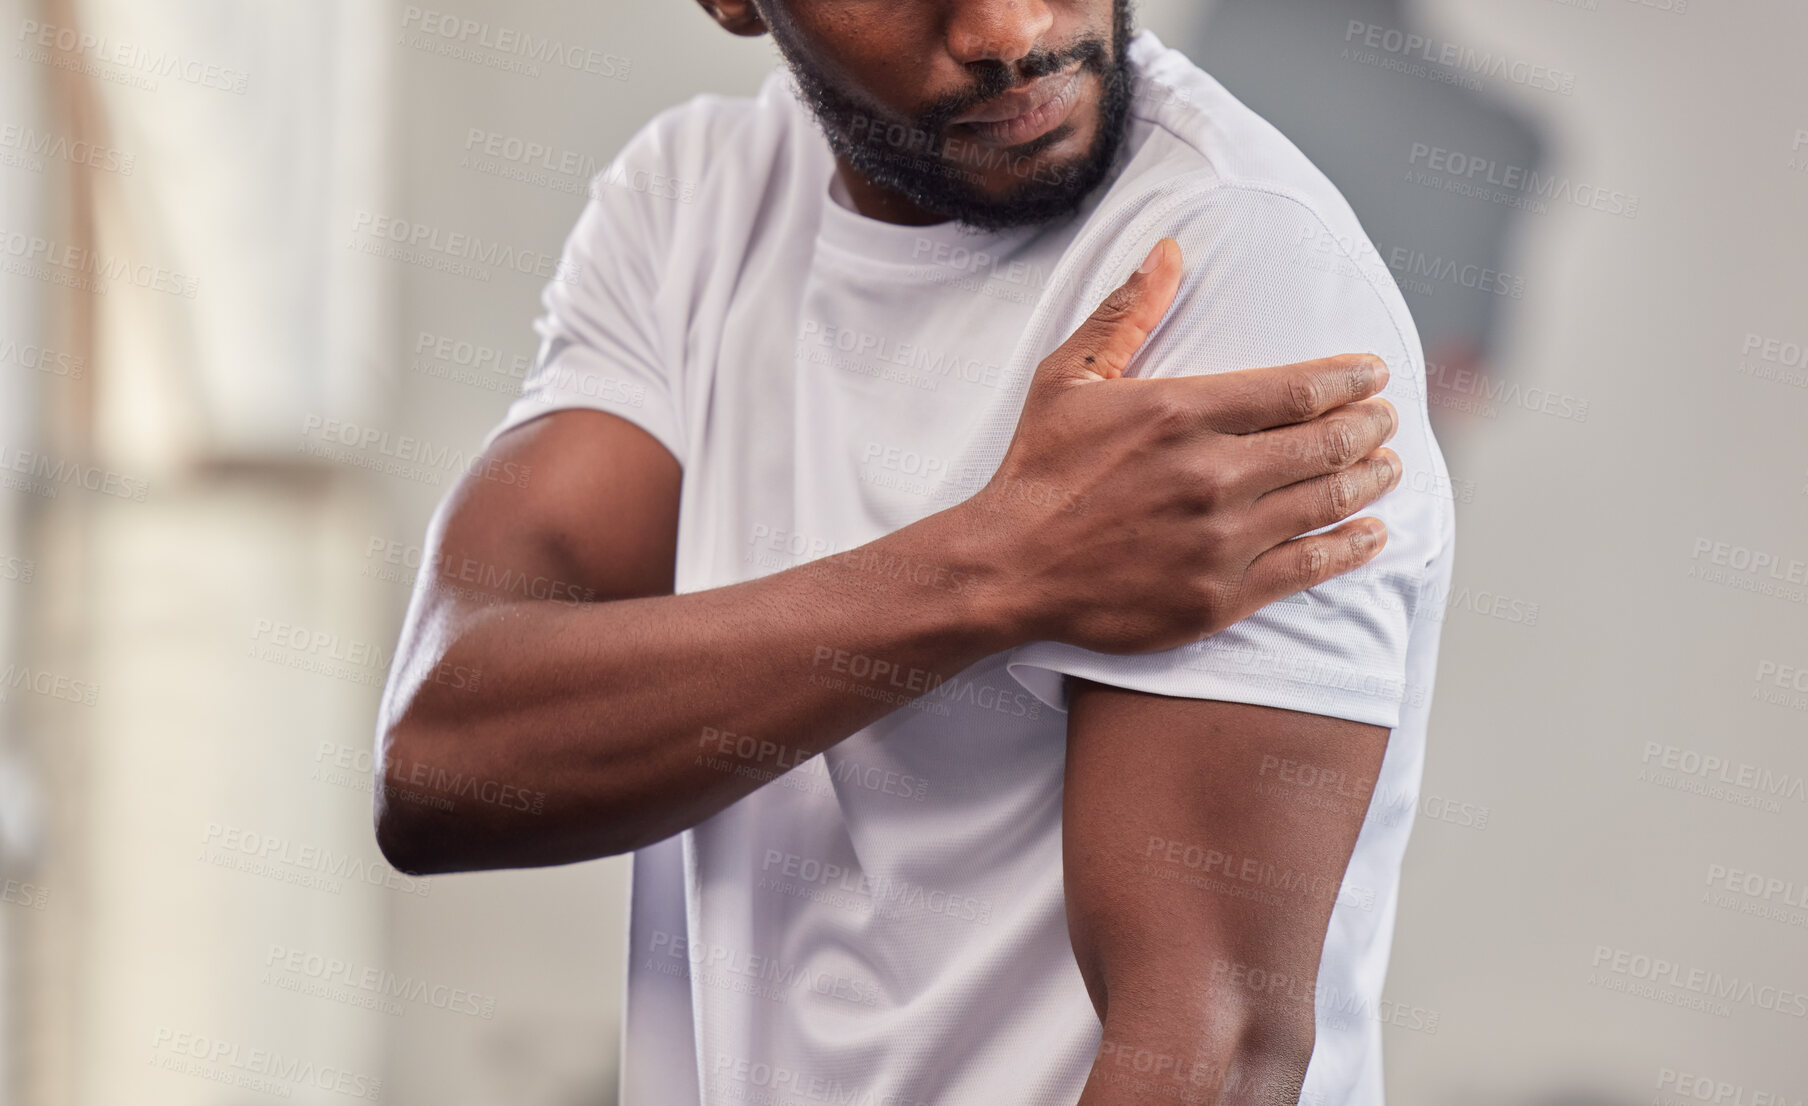 Buy stock photo Shoulder pain, fitness and black man with injury in gym after accident, workout or training. Sports, health and male athlete with fibromyalgia, inflammation or arthritis, tendinitis or painful arm.